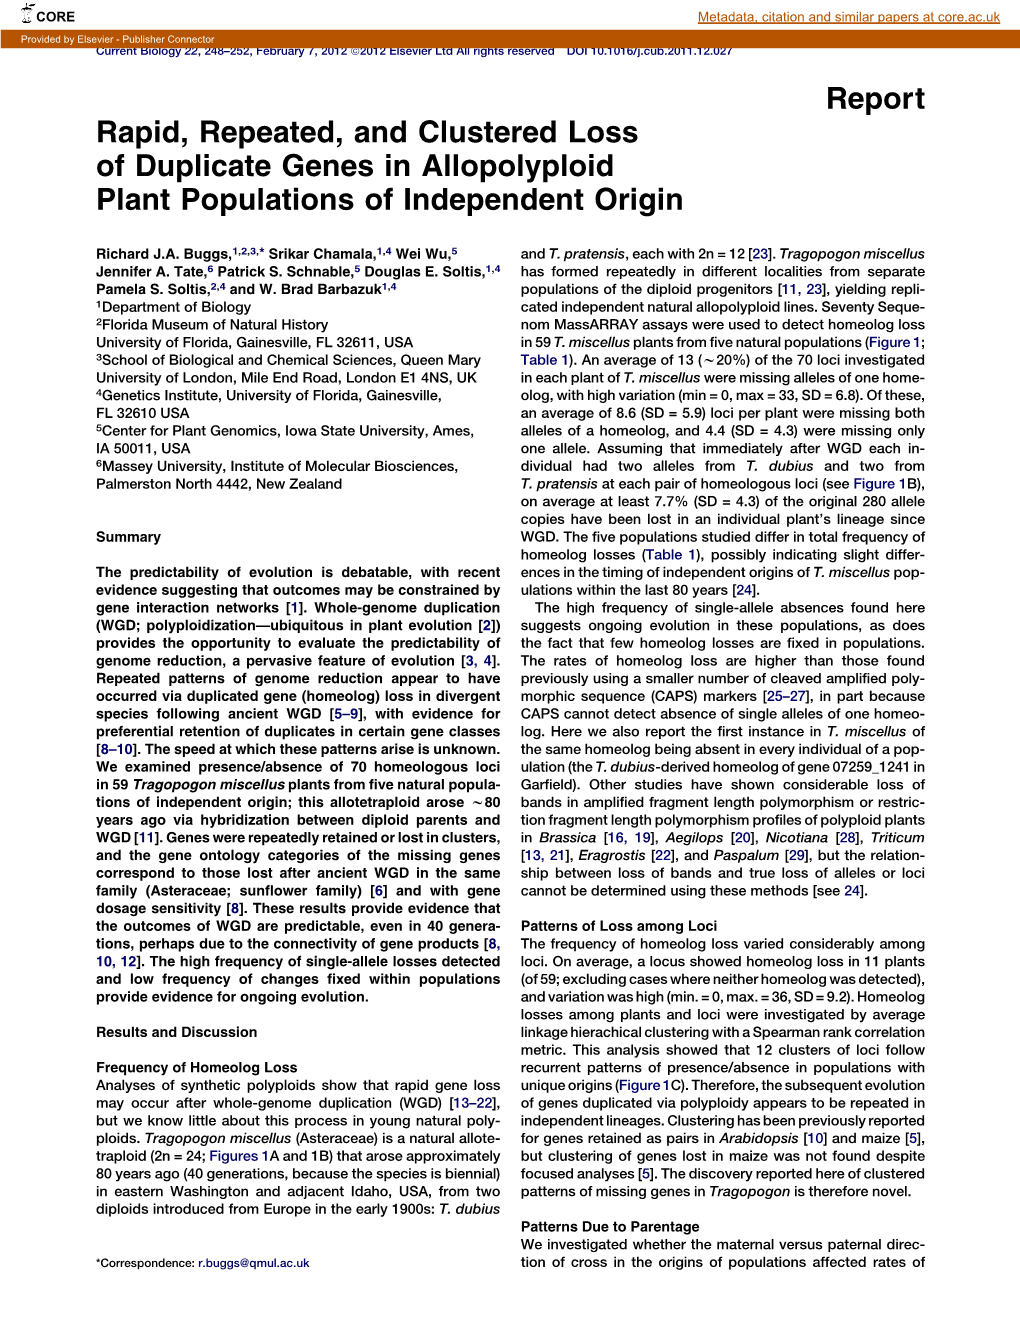 Rapid, Repeated, and Clustered Loss of Duplicate Genes in Allopolyploid Plant Populations of Independent Origin